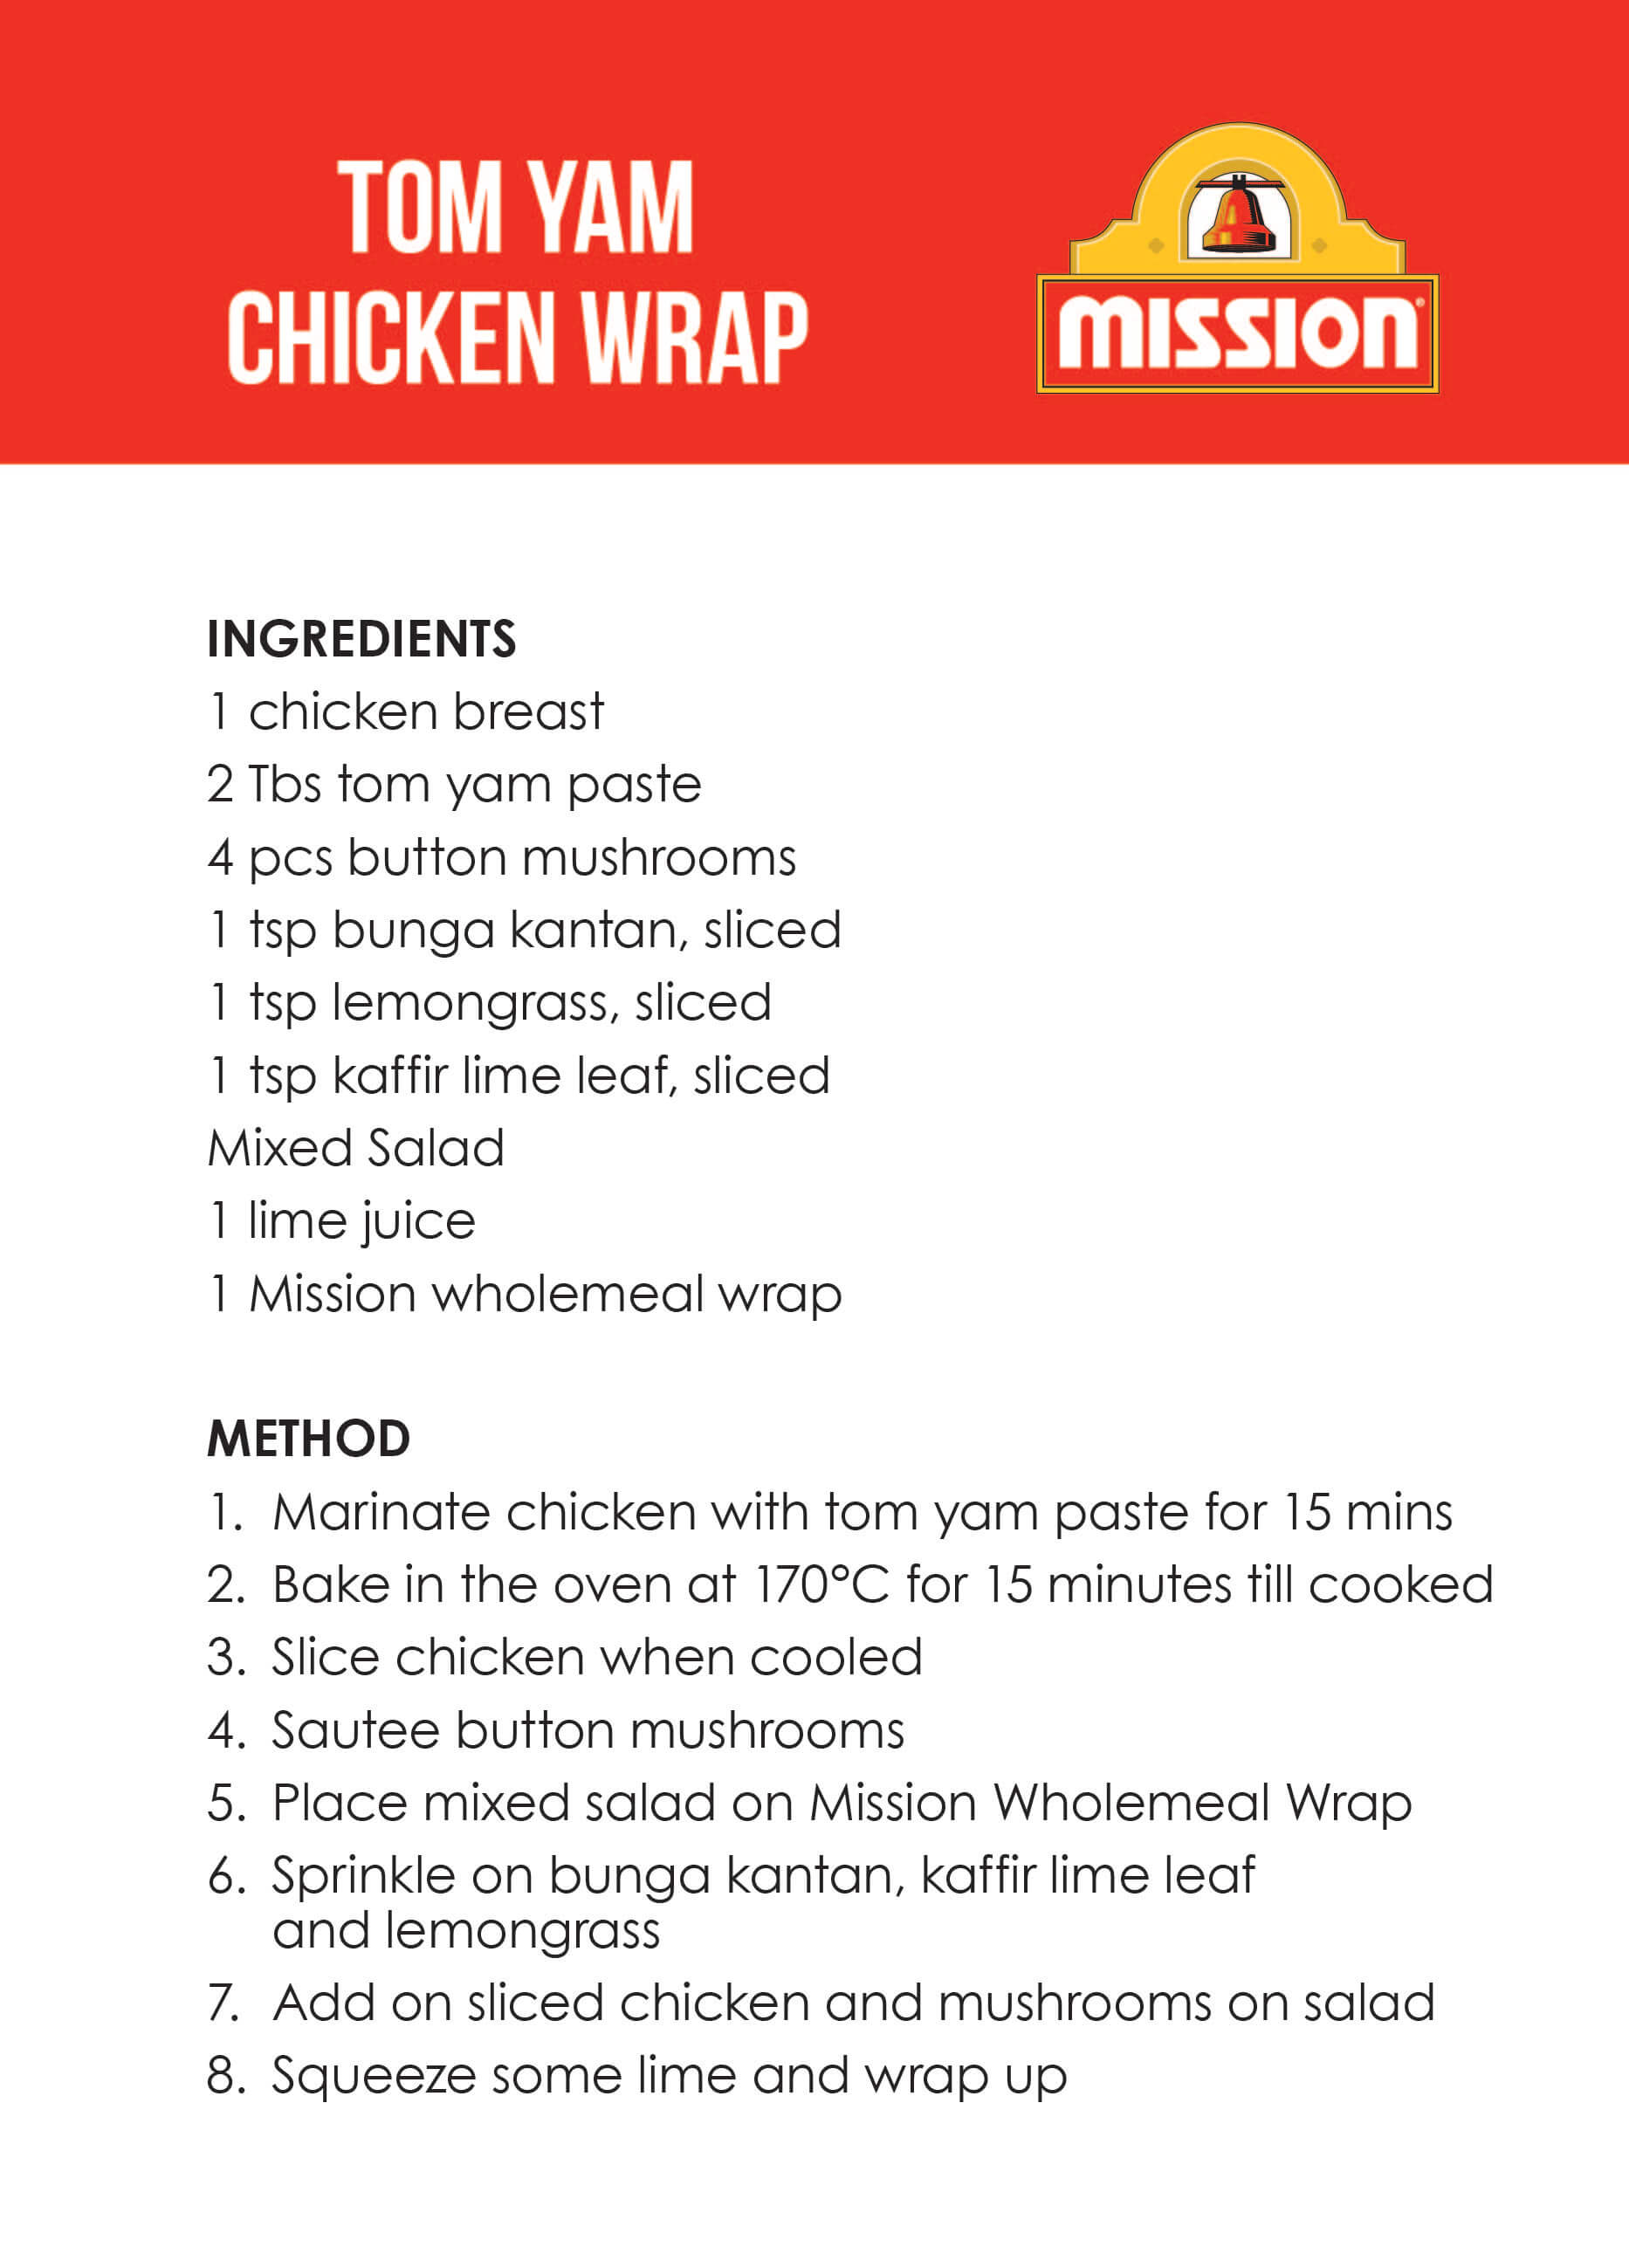 One of the recipes using Mission wraps 